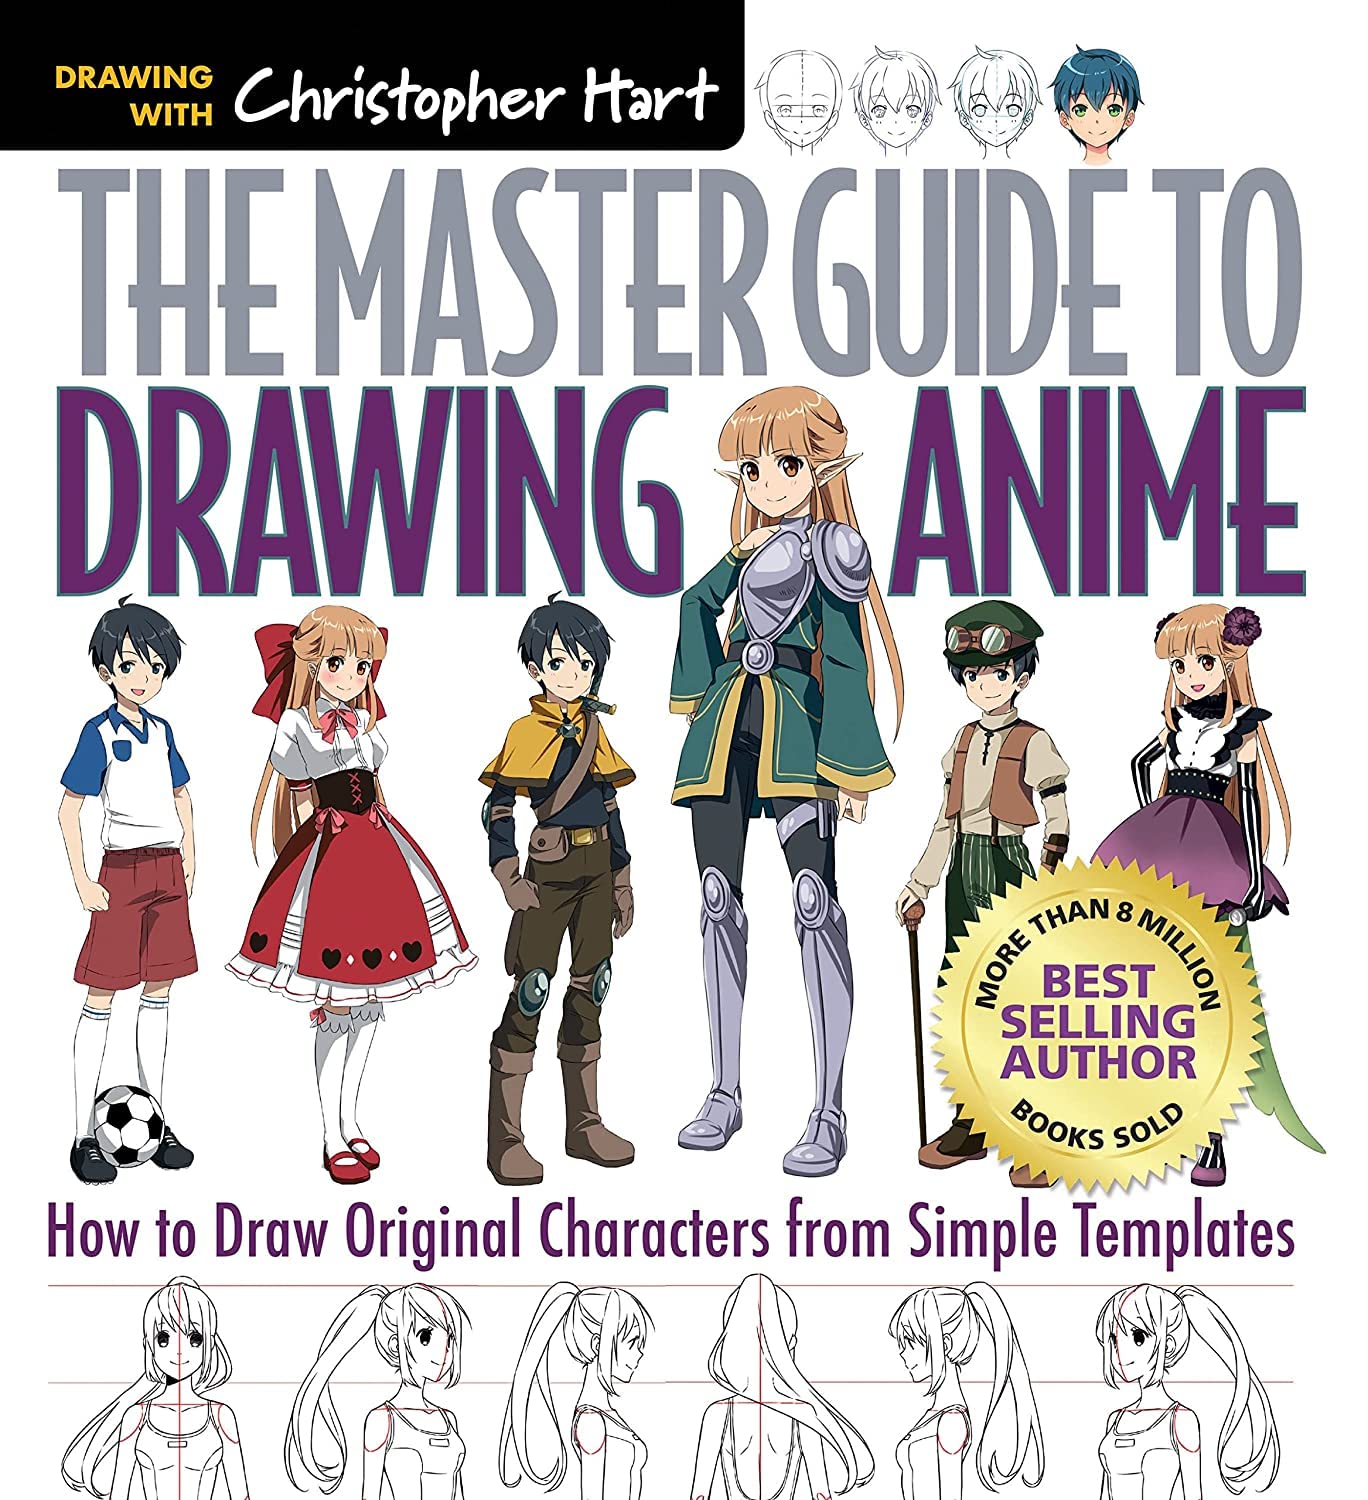 The Master Guide to Drawing Anime-How to Draw Original Characters from Simple Templates-Stumbit Arts